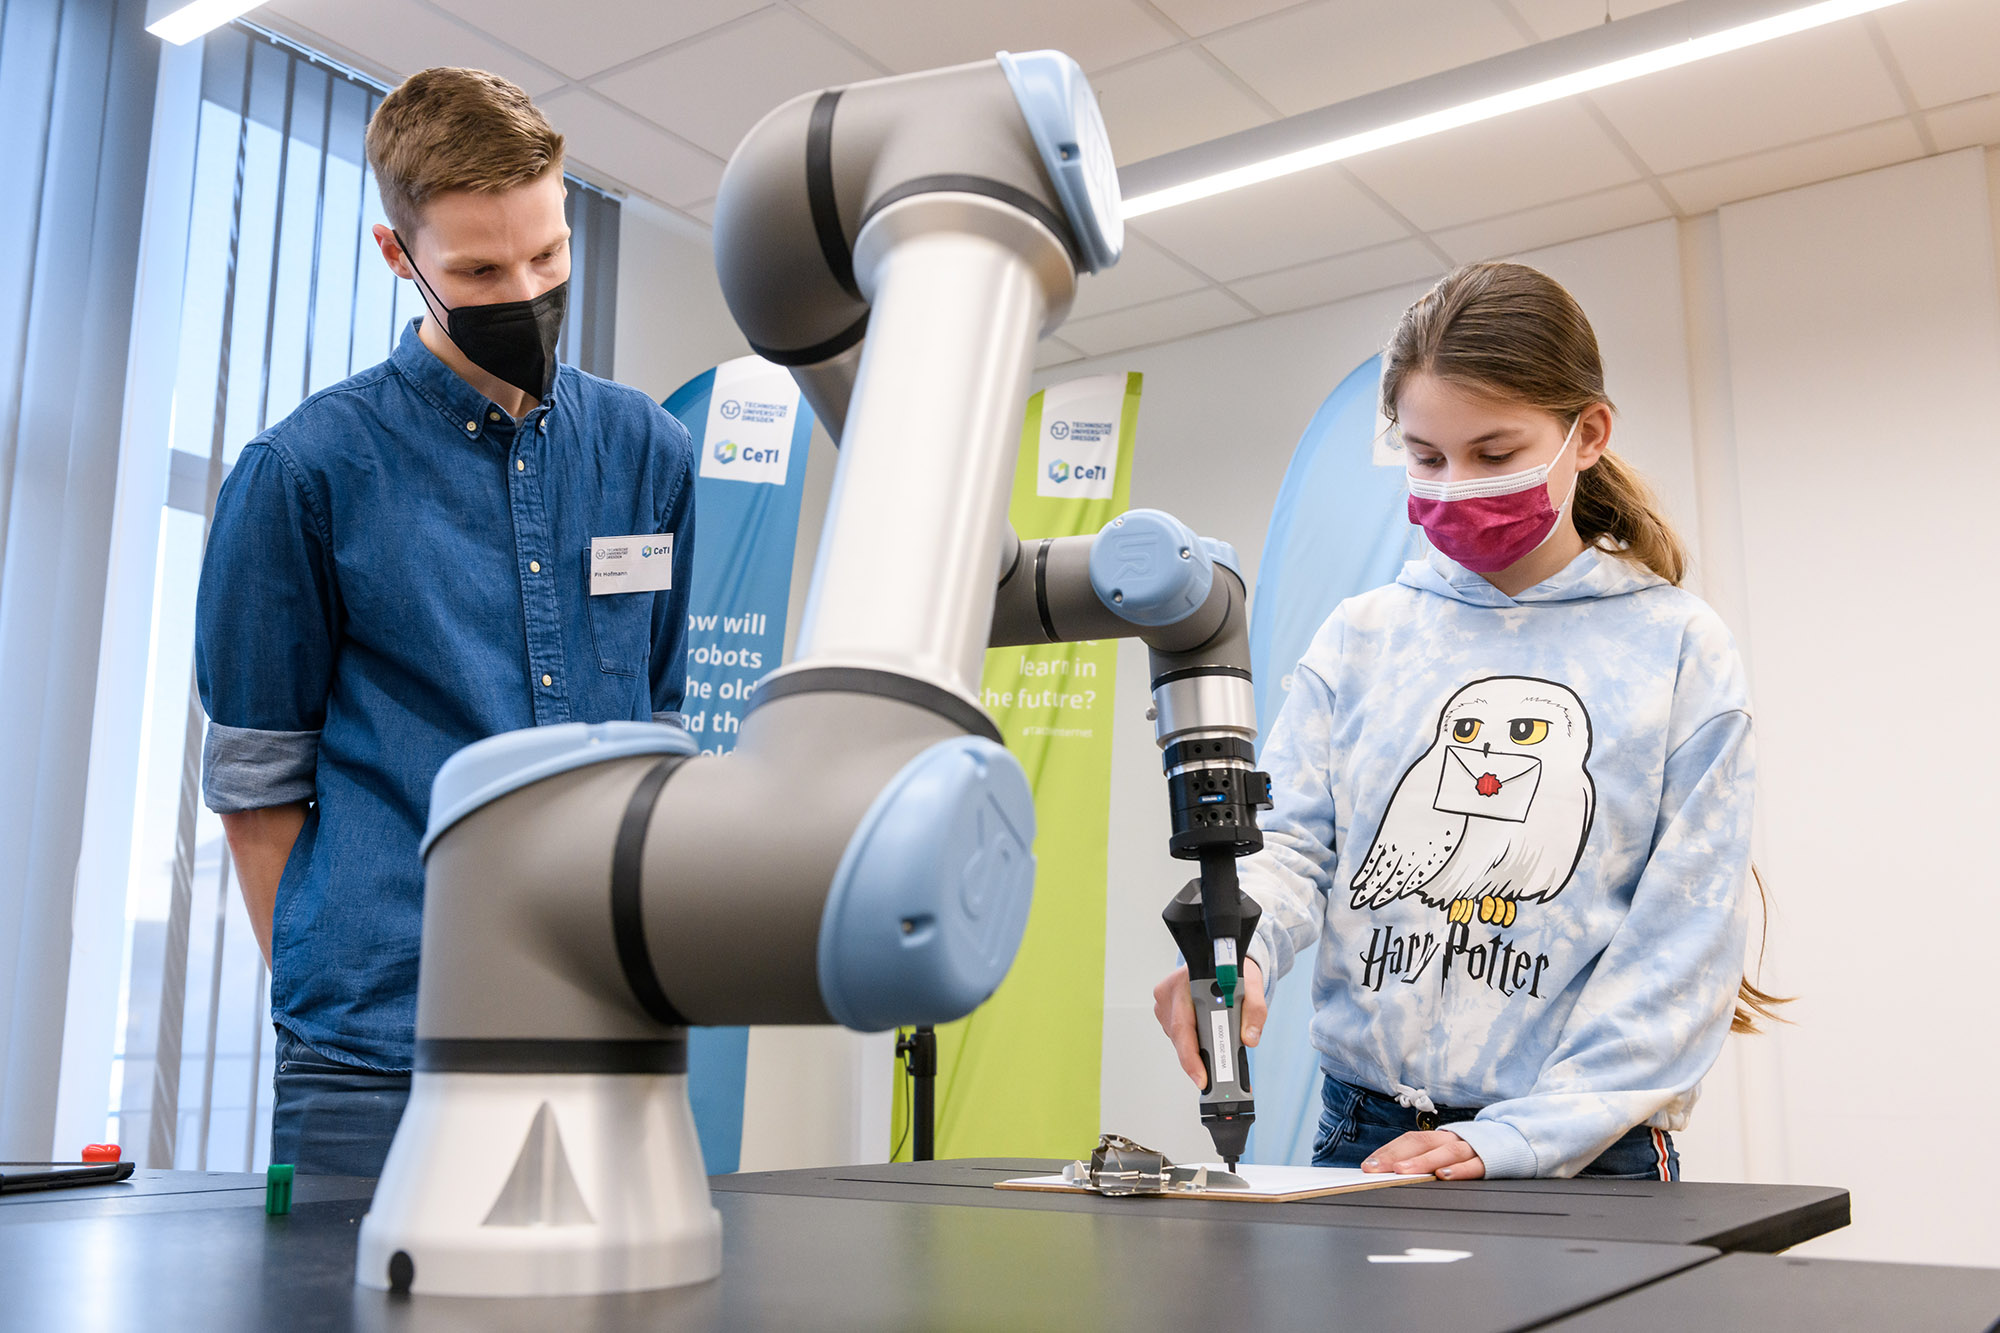 Photograph of a child next to a robotic arm while using a smart pen. Next to the child is a researcher explaining the functionality of the robot.